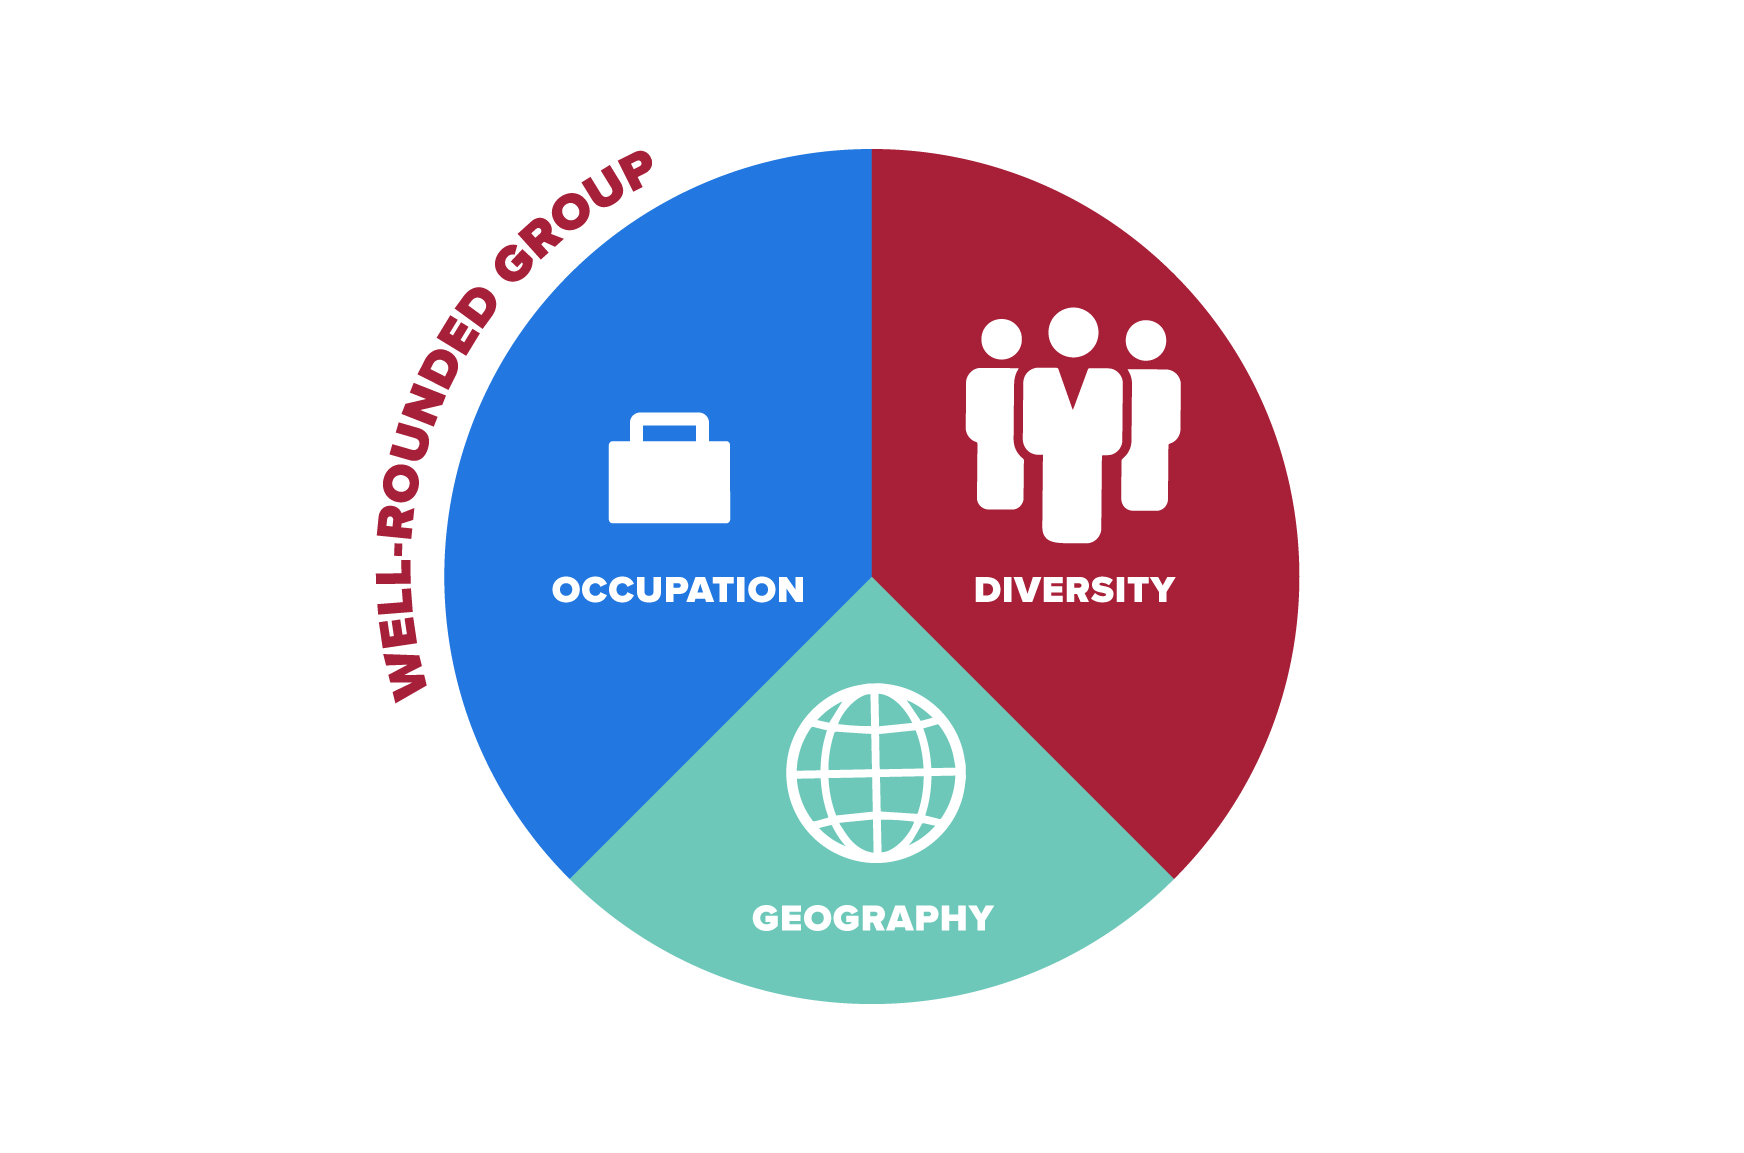 Image representing a well-rounded cadre: diversity, geography, occupation